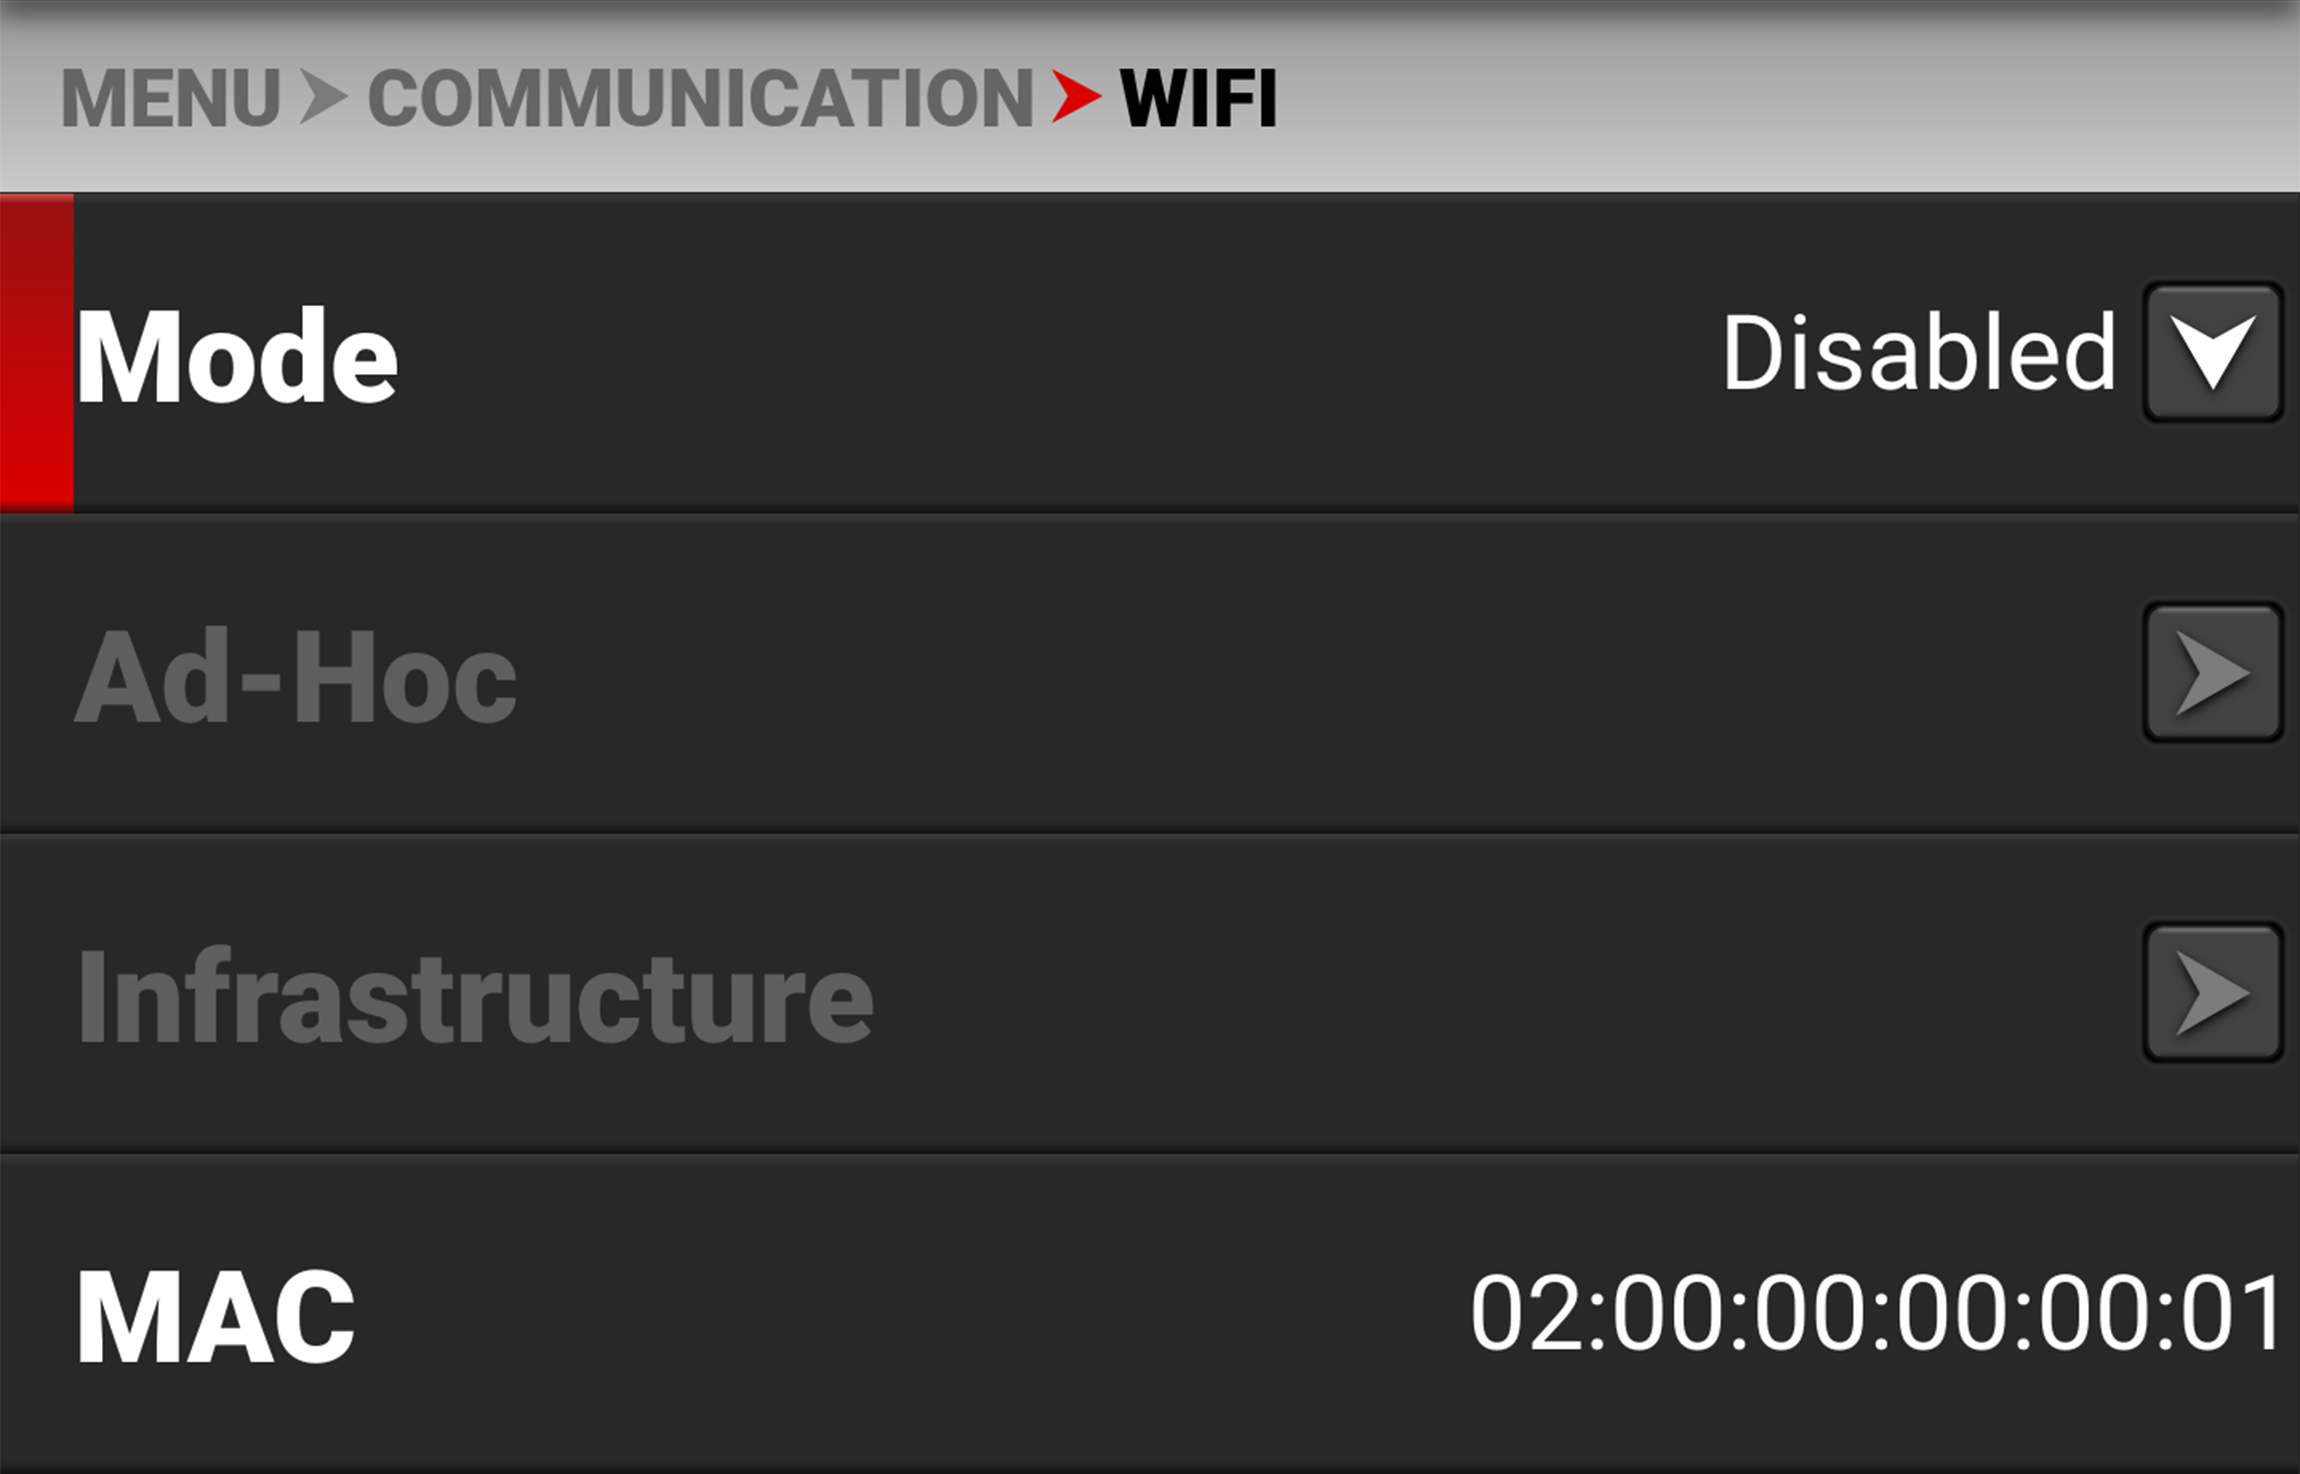 LCD_Comm_WiFi_Mode_D_5-18c.png